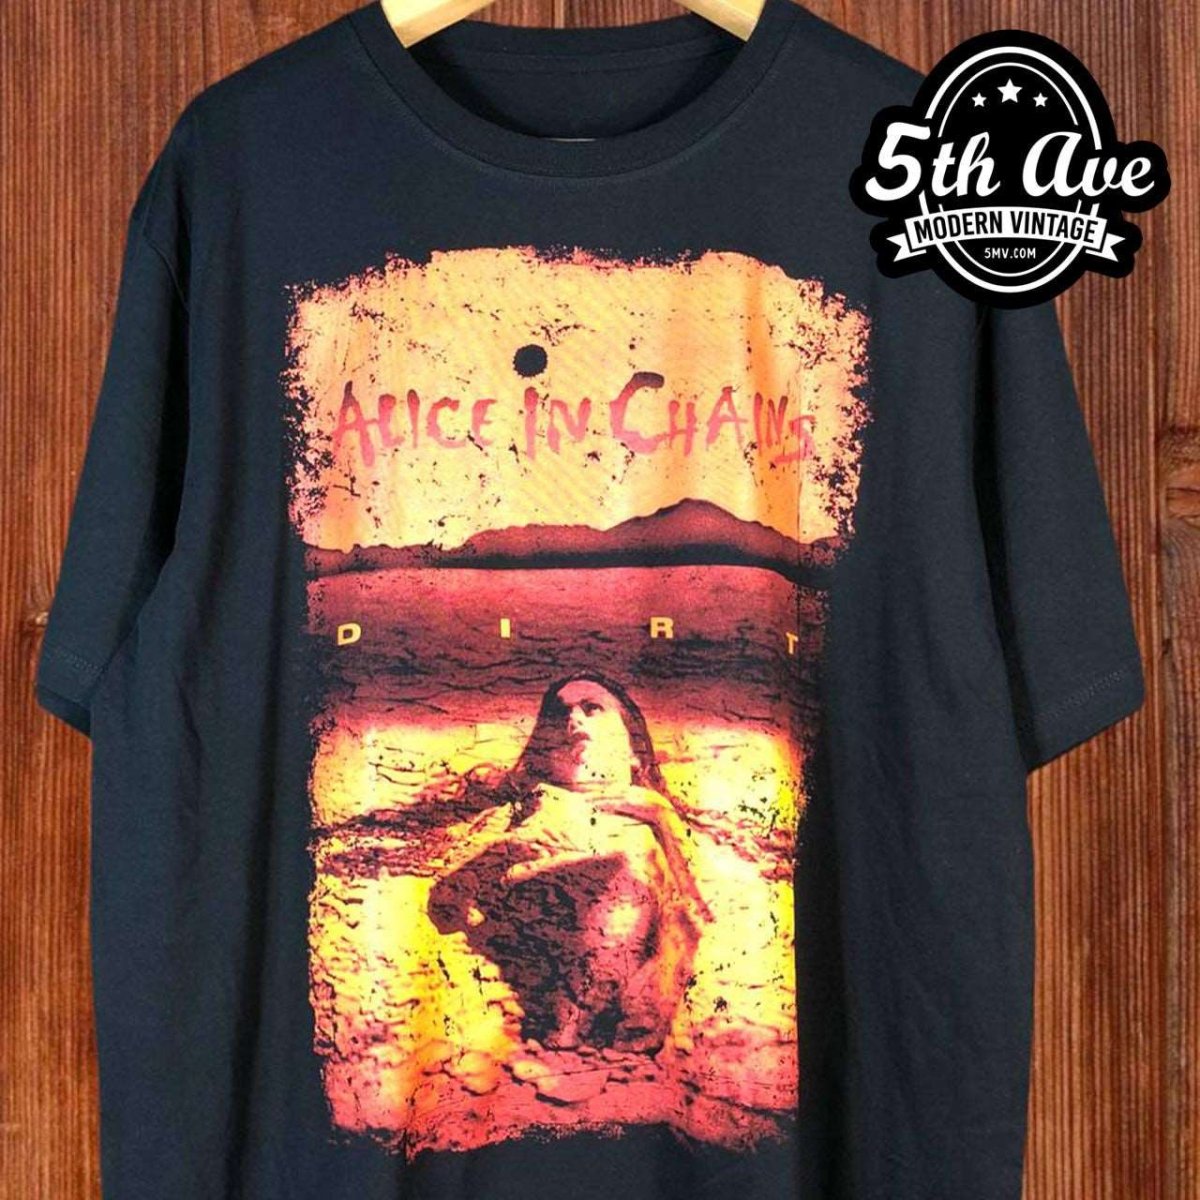 Dive into the Grunge Era: Alice in Chains 'Dirt' Short Sleeve Crew Neck t shirt - Vintage Band Shirts